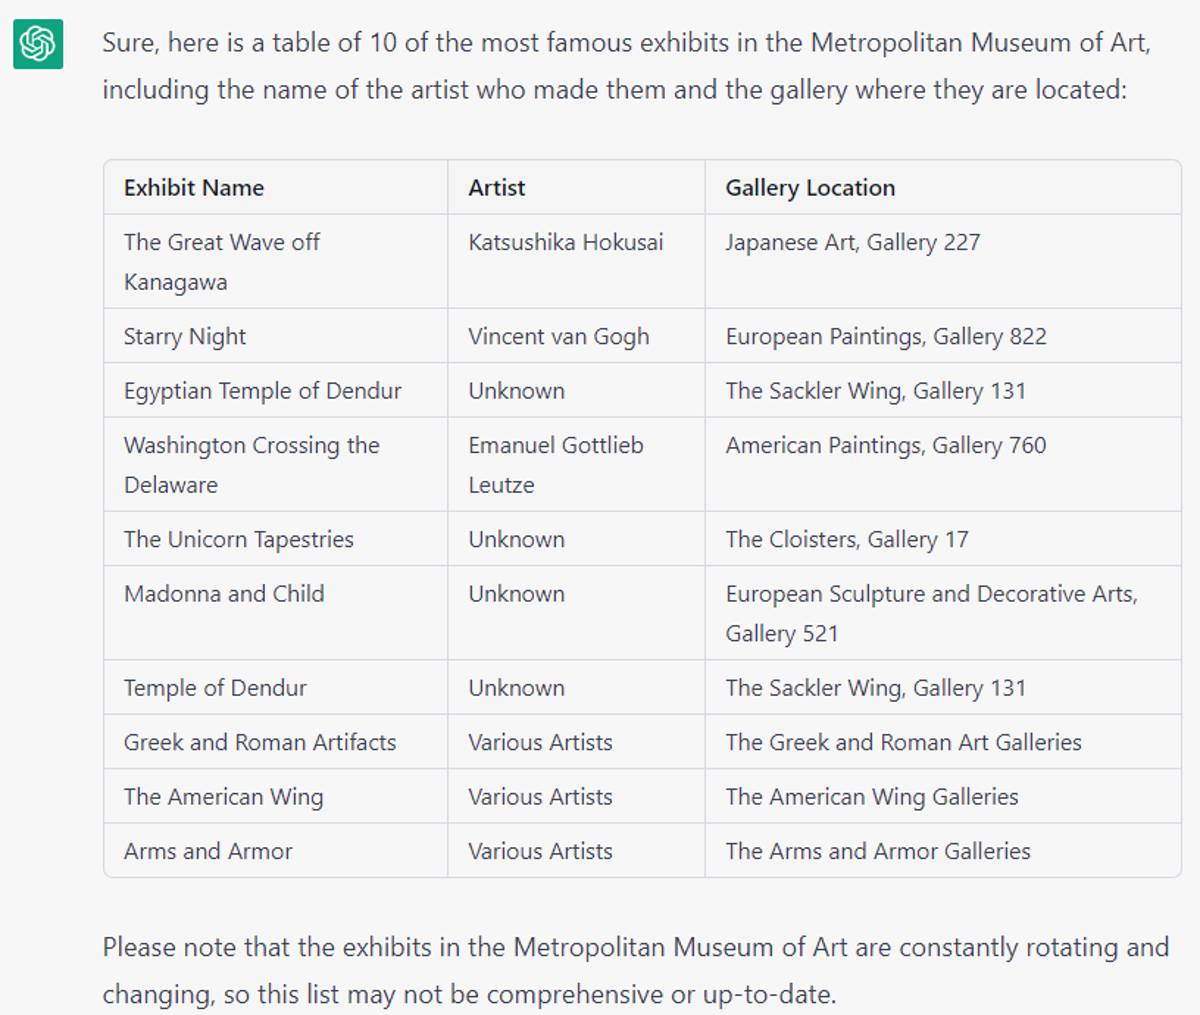 Output from ChatGPT showing the most famous exhibits in the Metropolitan Museum of Art, the creator of the work, and the gallery it is located in.